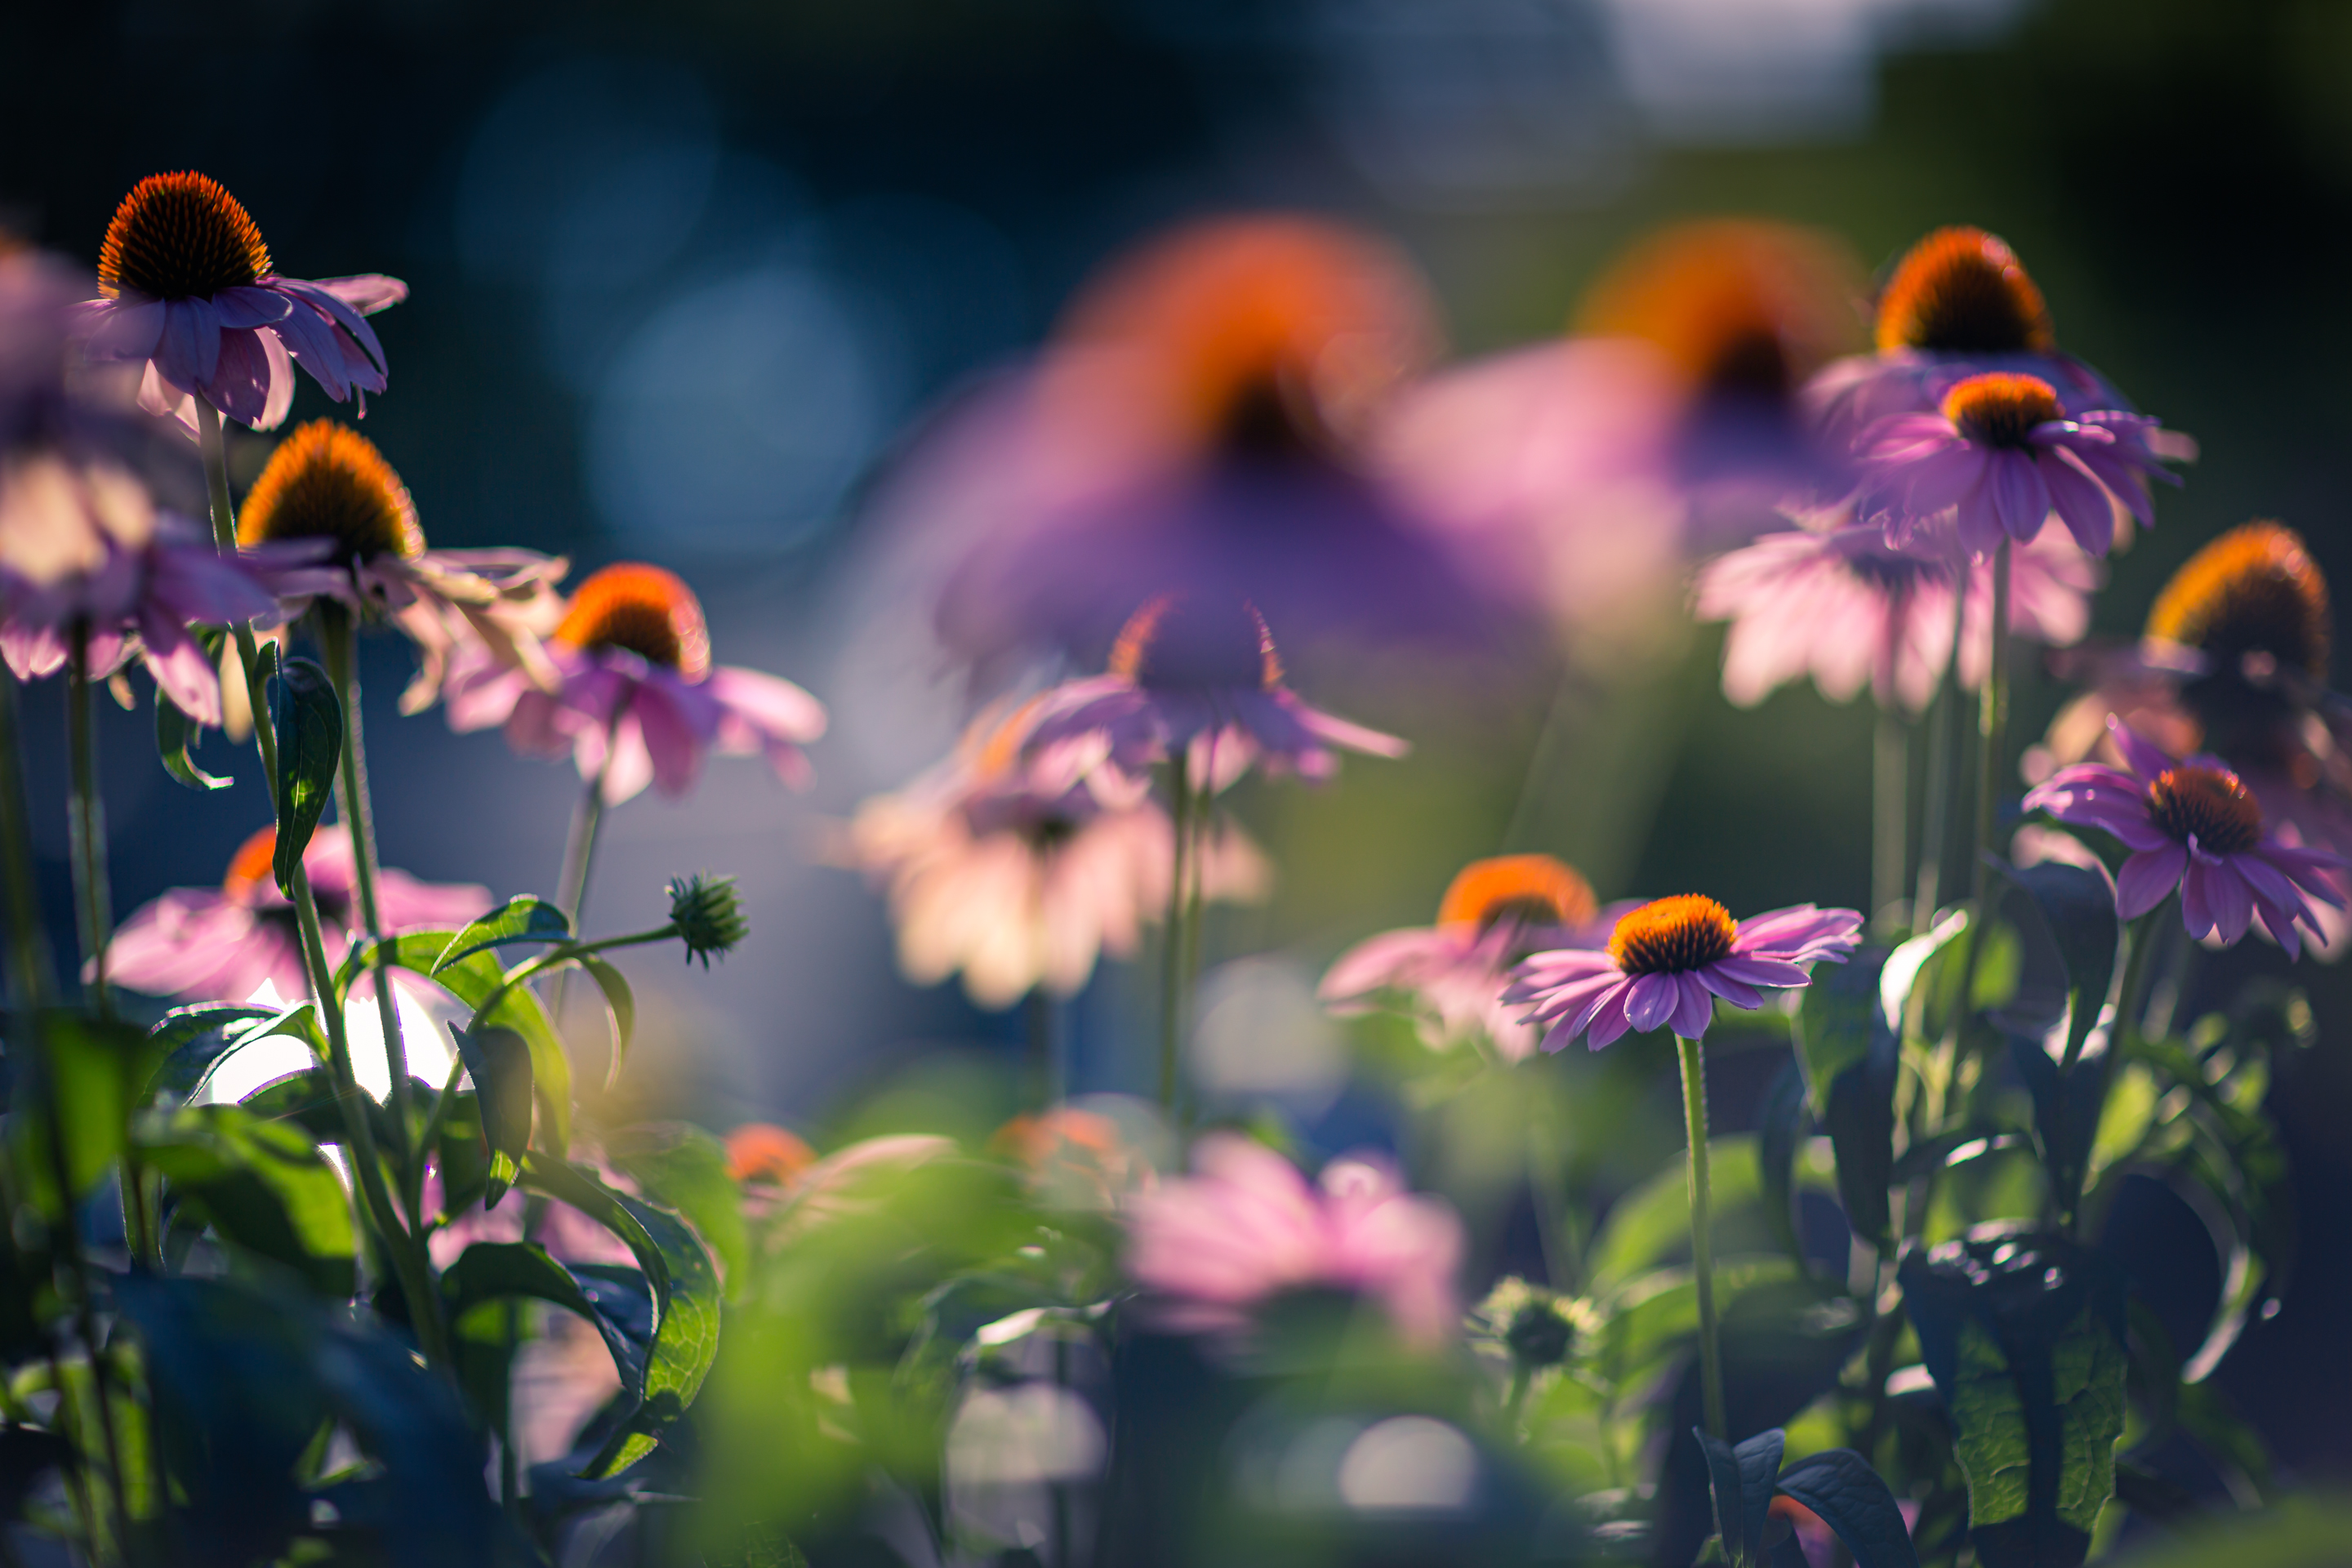 85mm photo of several purple coneflowers spread in full bloom. Smooth bokeh and shallow depth of field move the eye in and out of the picture.